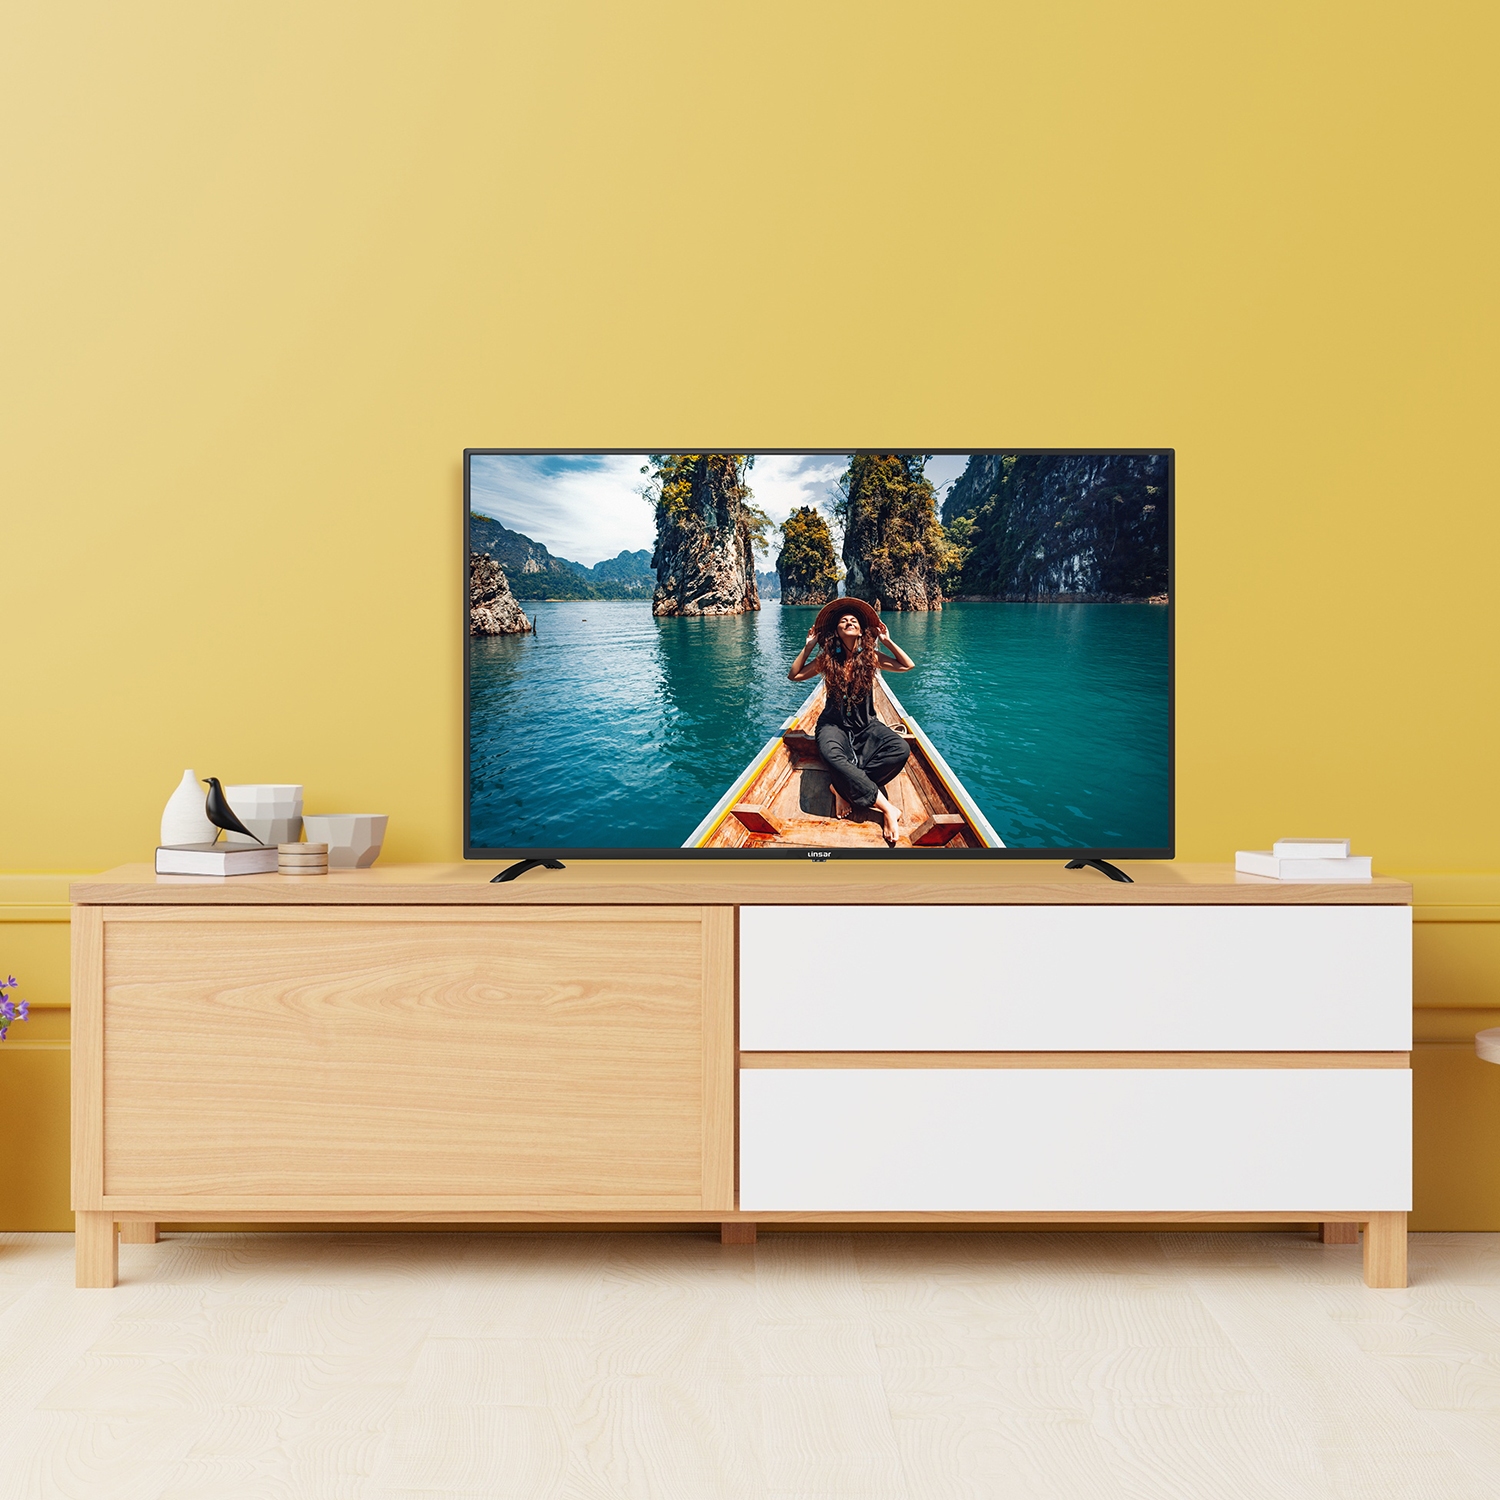 Linsar GT32LUXE 32" HD Ready TV - Freeview Play and USB Record/Playback - 2